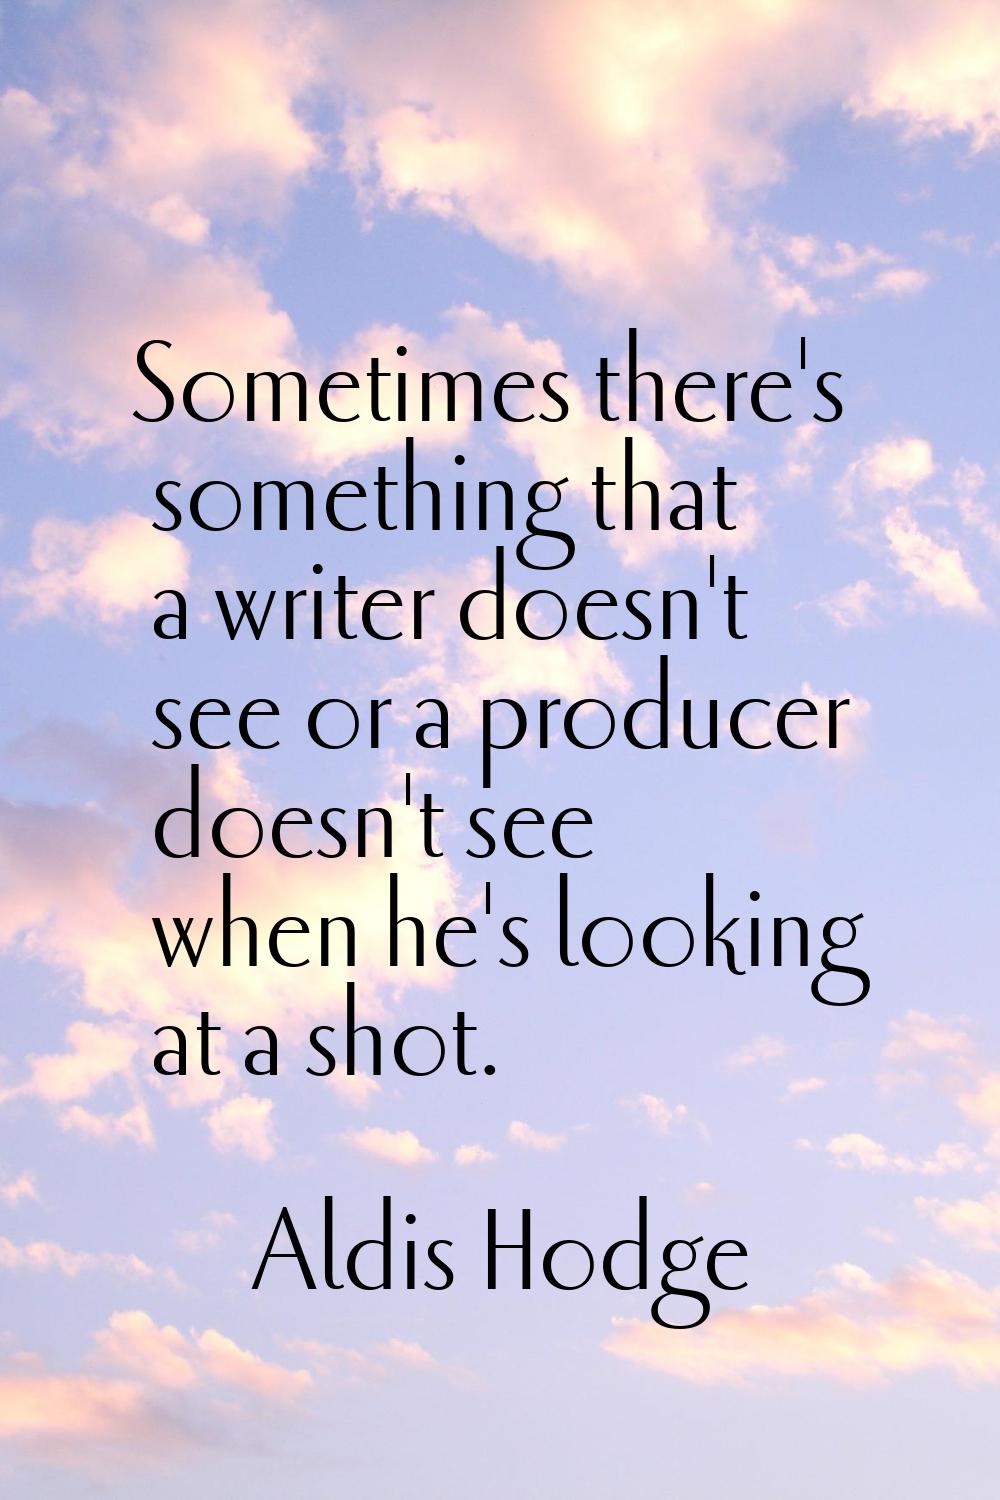 Sometimes there's something that a writer doesn't see or a producer doesn't see when he's looking a